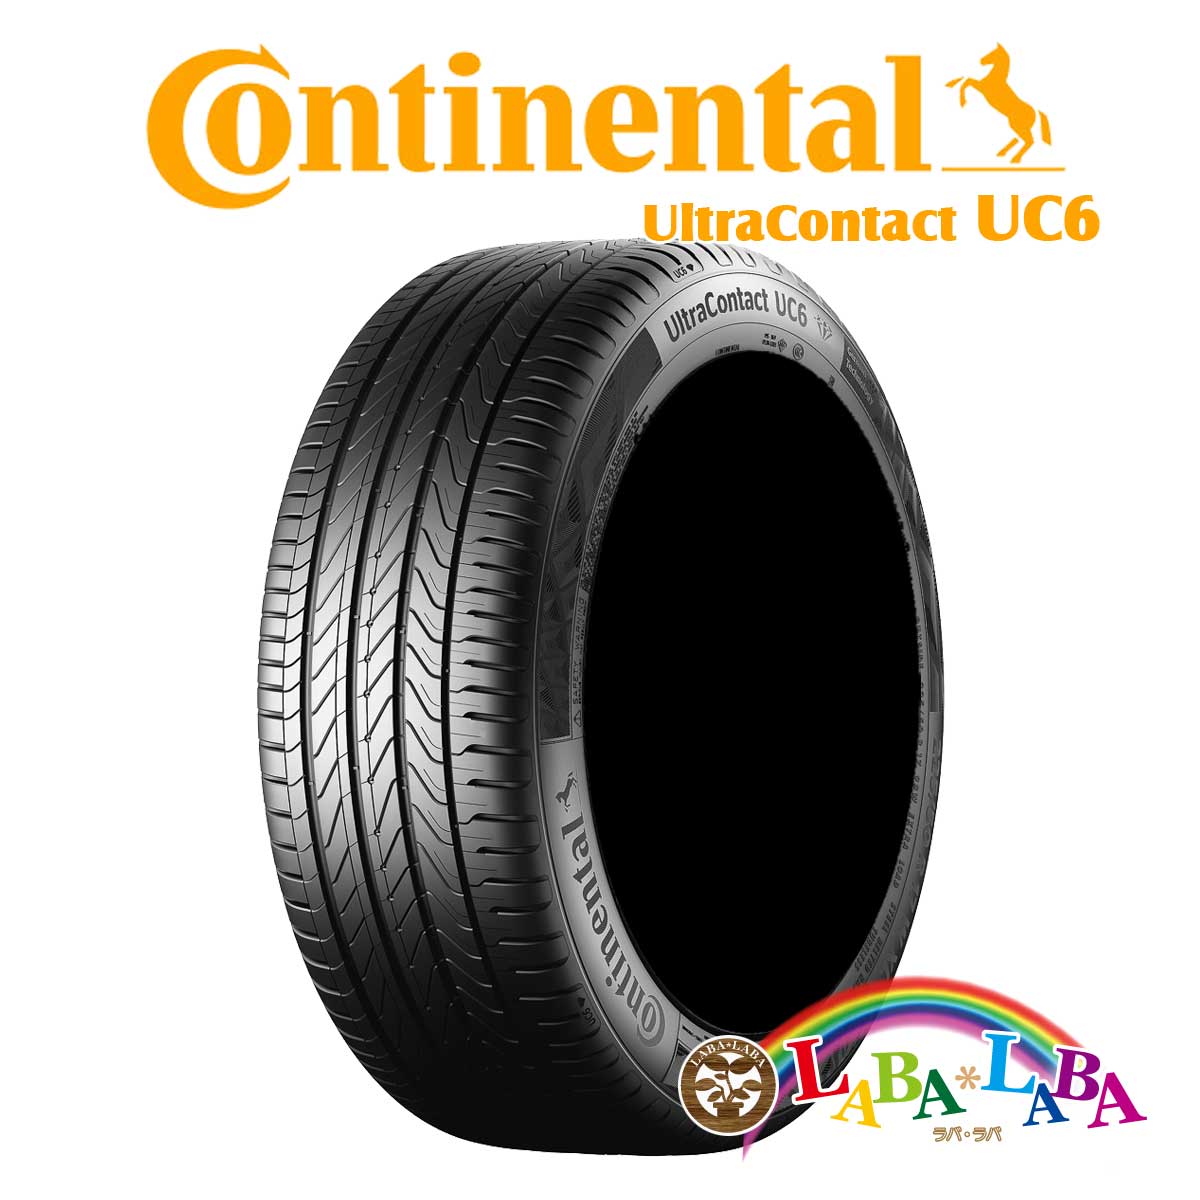 CONTINENTAL UltraContact UC6 225/45R17 94W XL サマータイヤ 4本セット